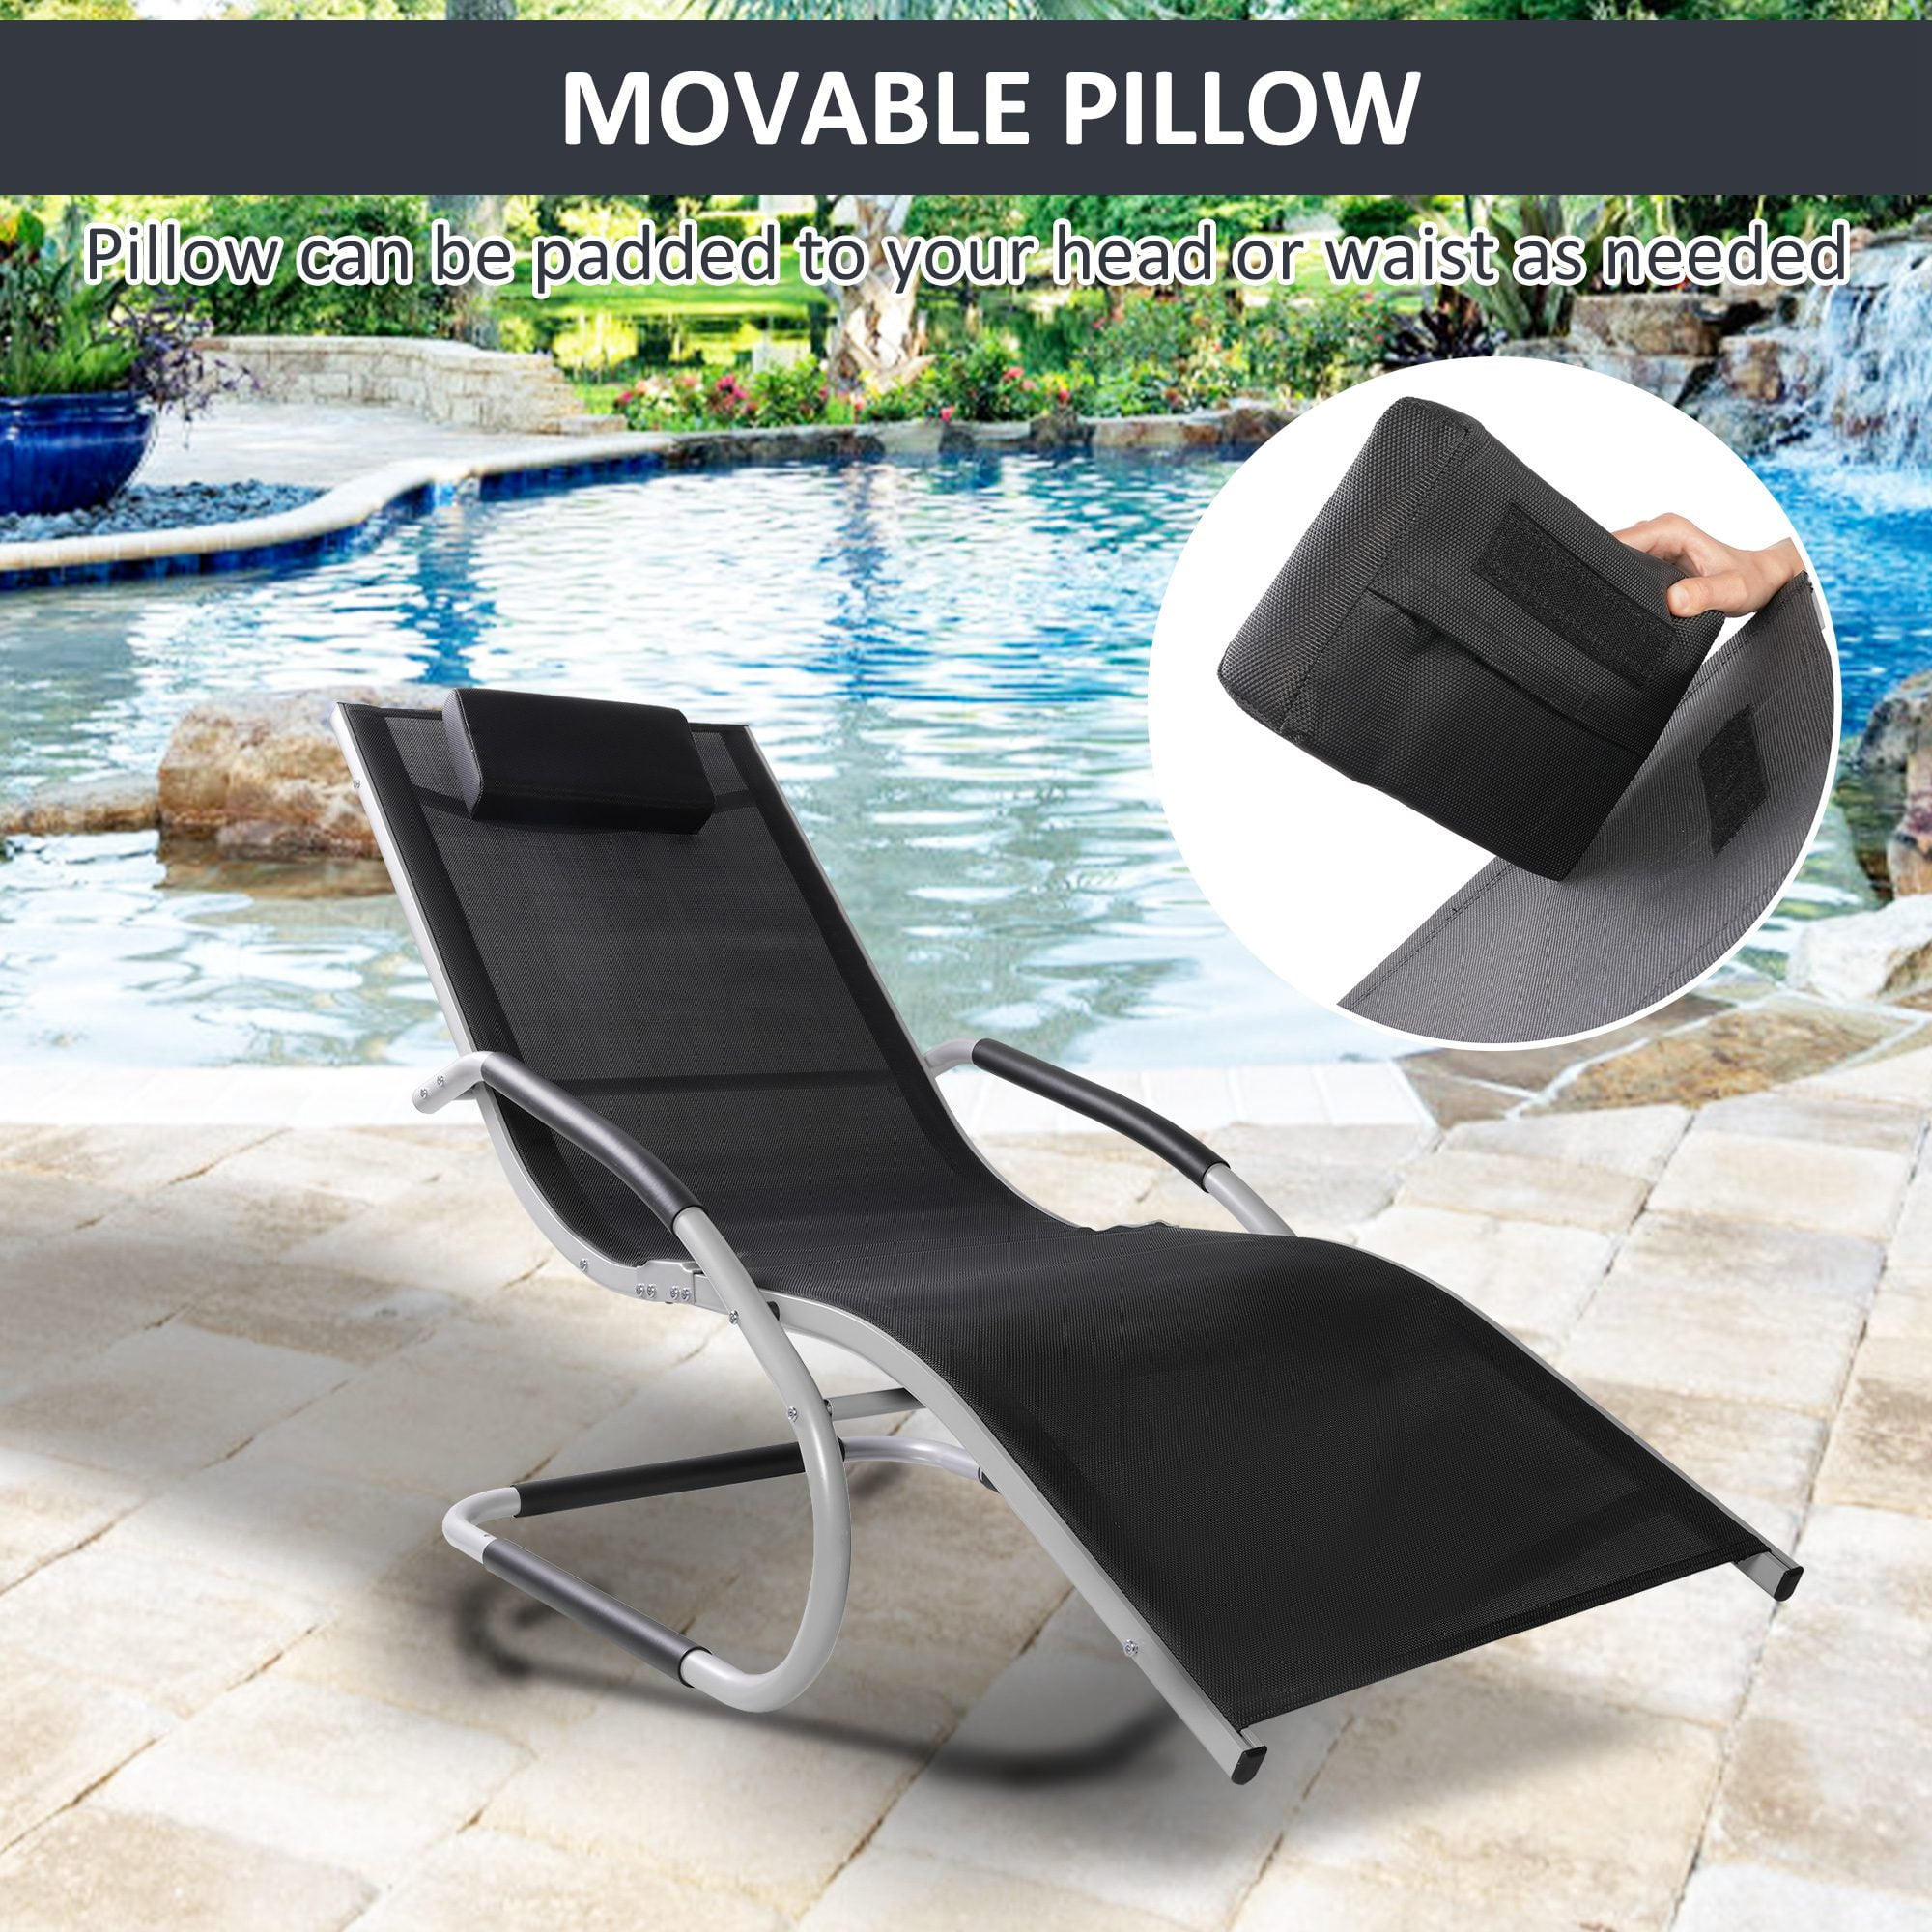  RGRE Extra Large Recliner Chair Cushion with Ties, Non-Slip  Cover High-Back Support Sun Lounger Cushion Rocking Chair Pad Garden Chair  Cushions : Patio, Lawn & Garden